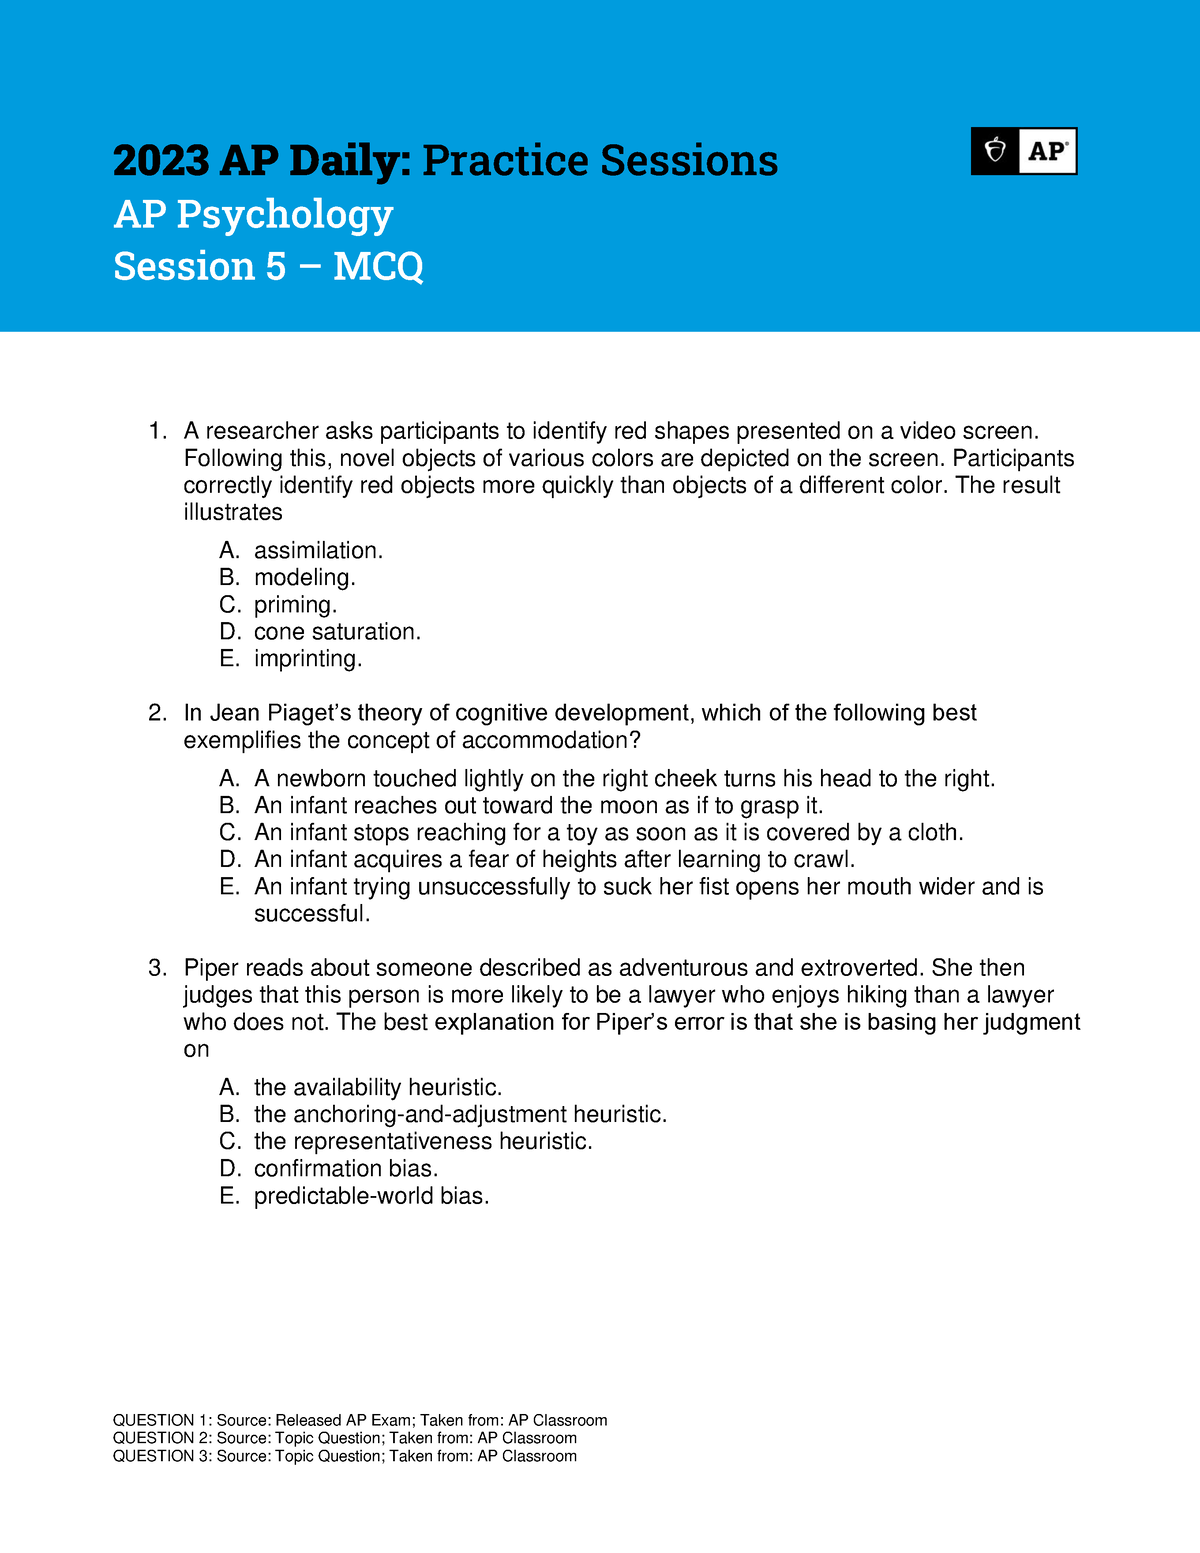 Session 5 Psychology 2023 AP Daily Practice Sessions QUESTION 1